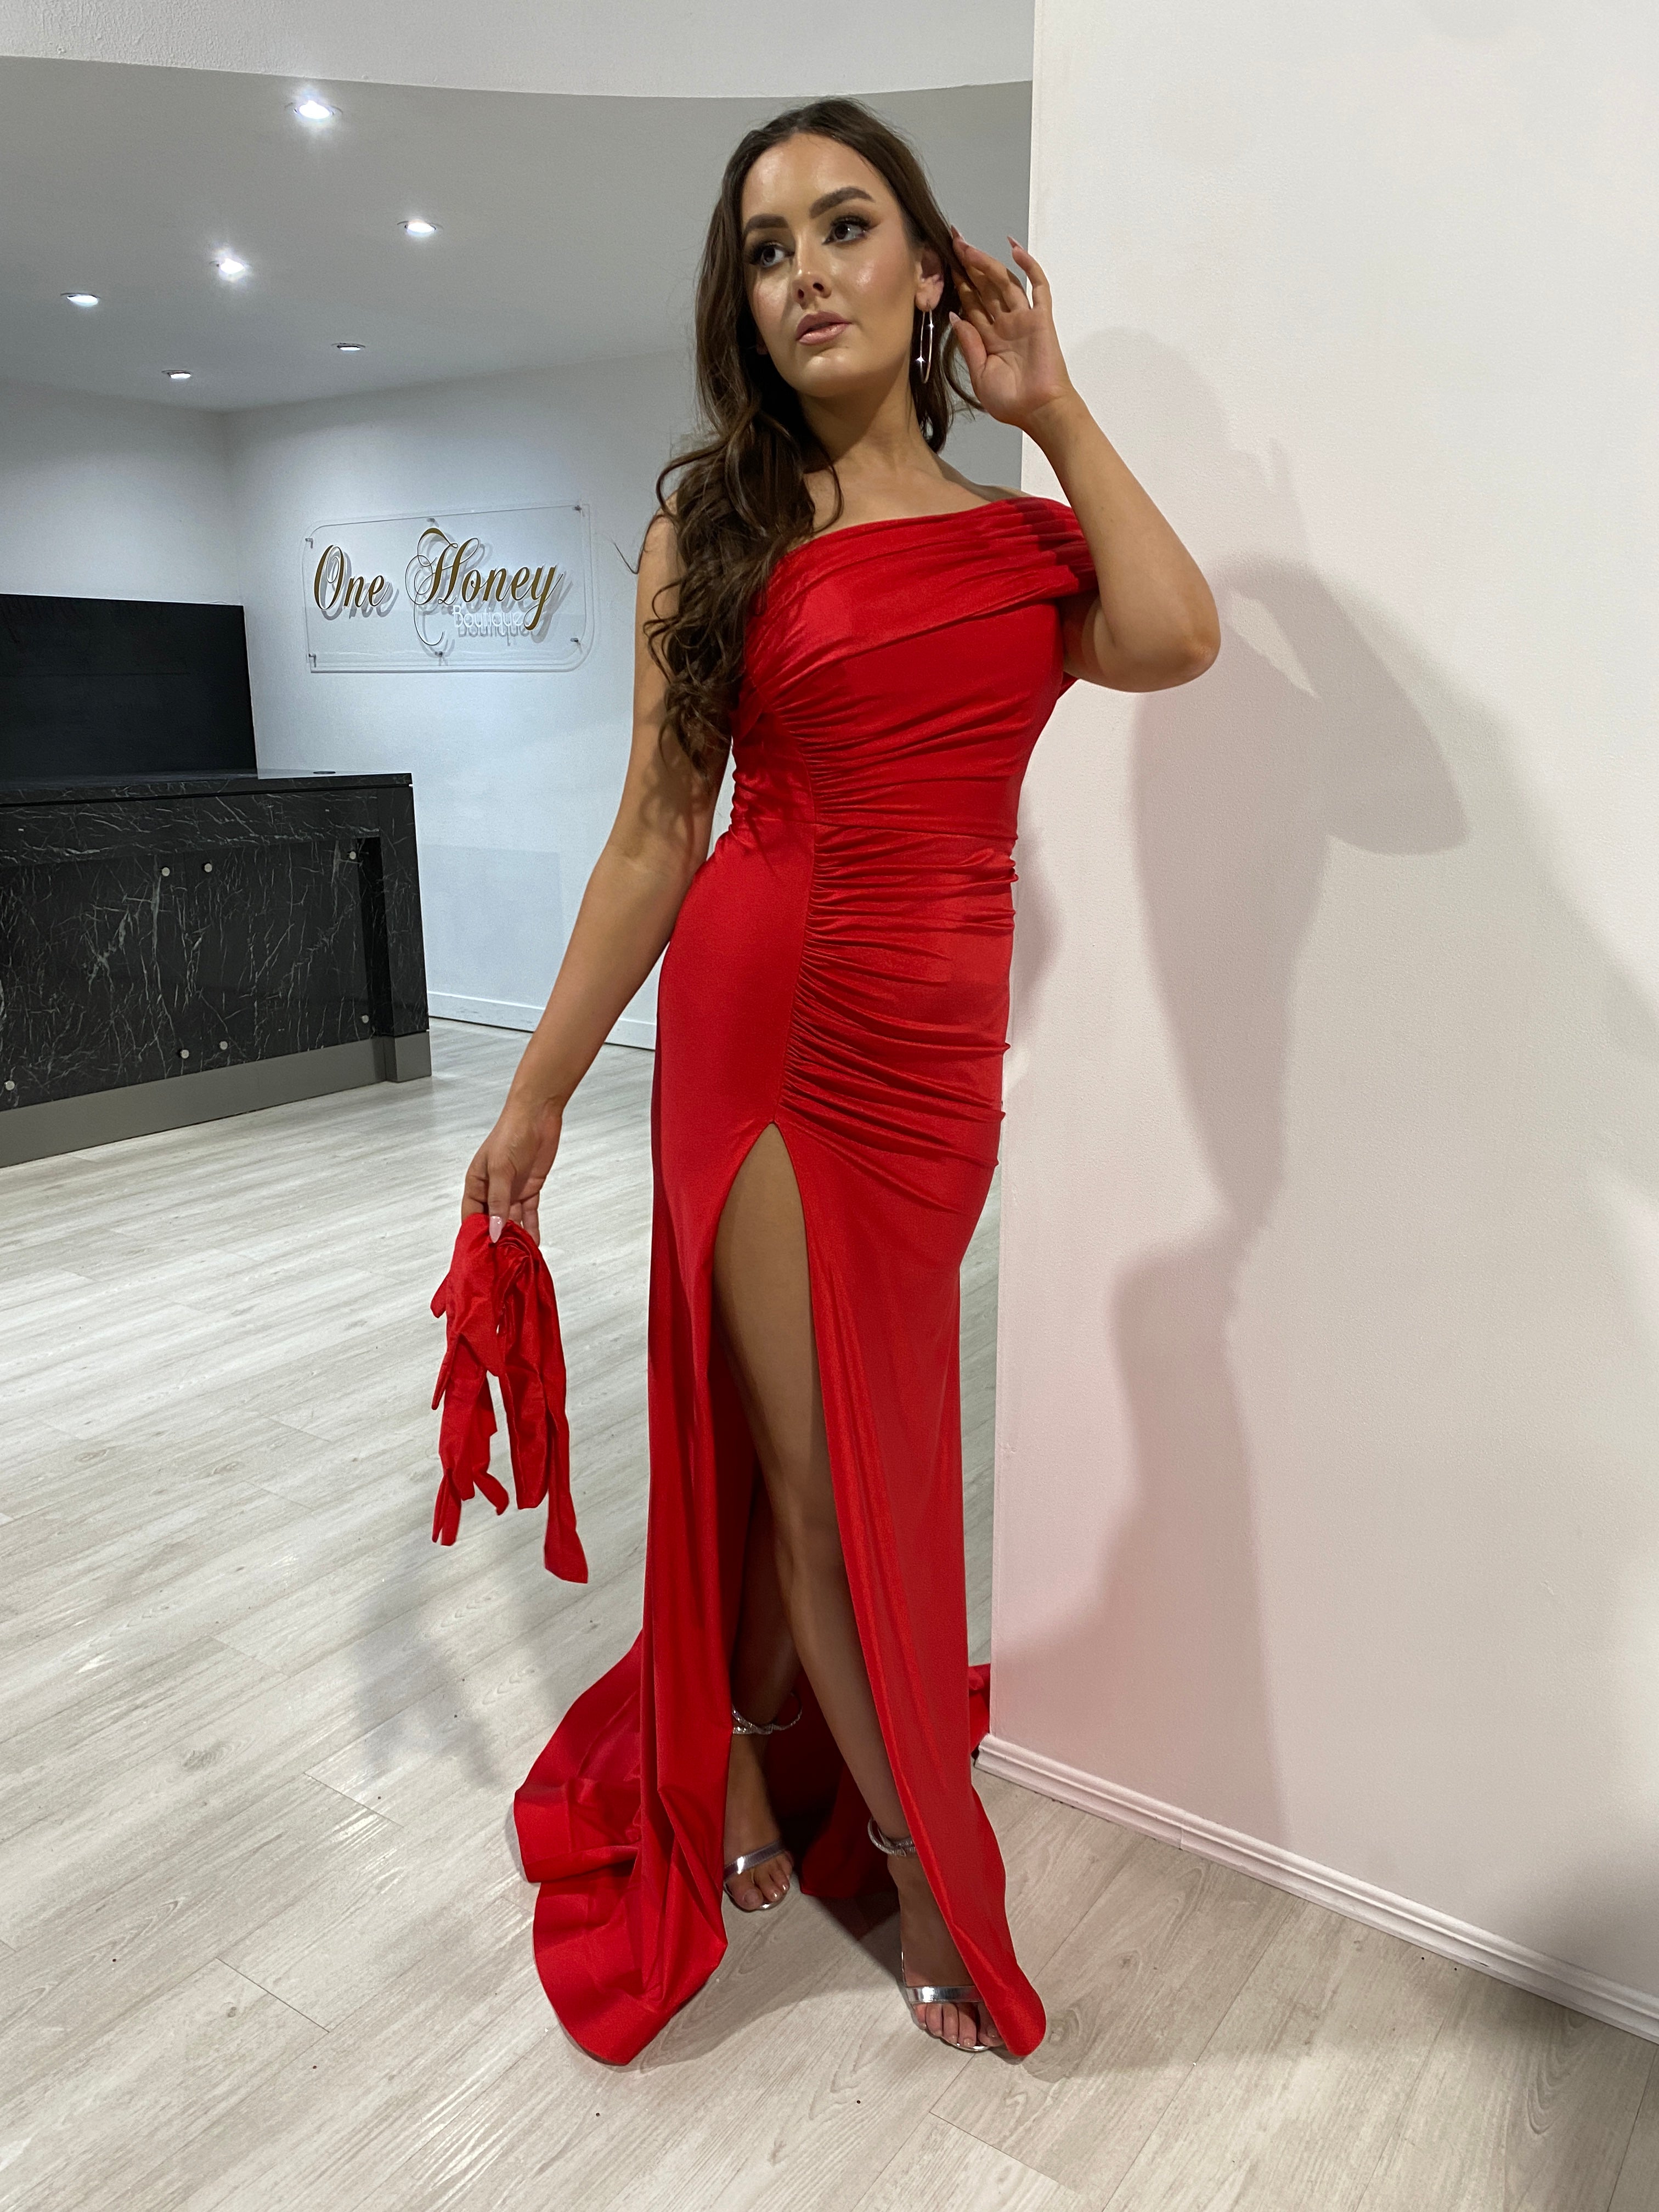 Honey Couture BALENCI-USSY Red Mermaid Formal Dress w Gloves